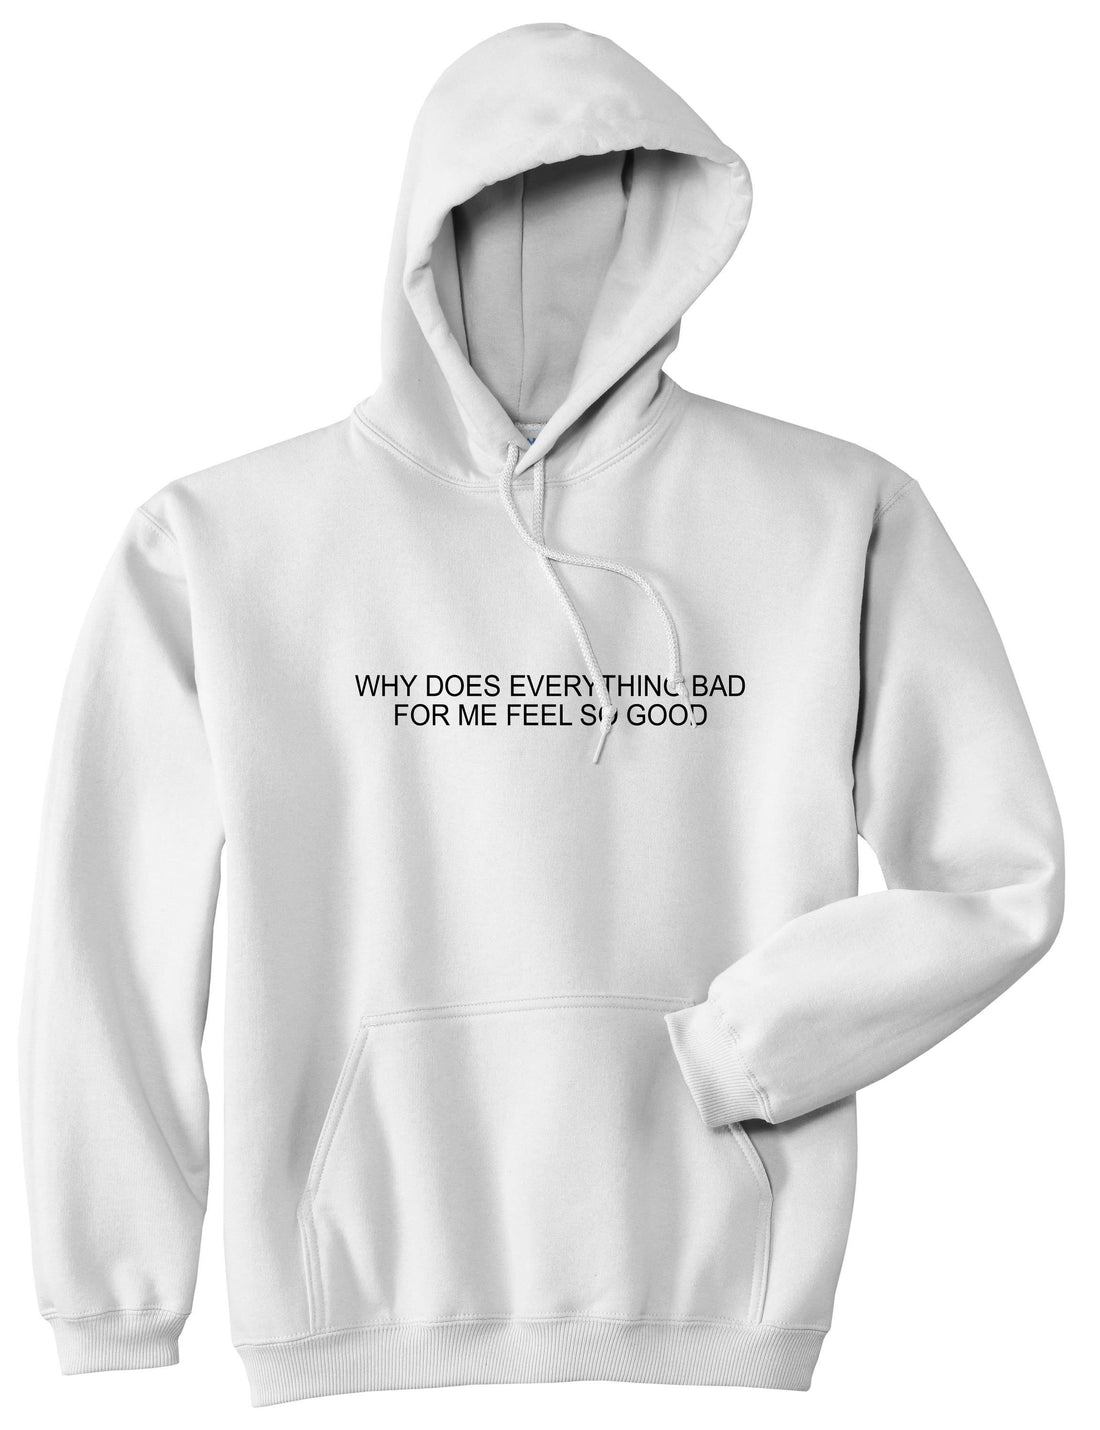 Why Does Everything Bad For Me Feel So Good Mens Pullover Hoodie Sweatshirt White